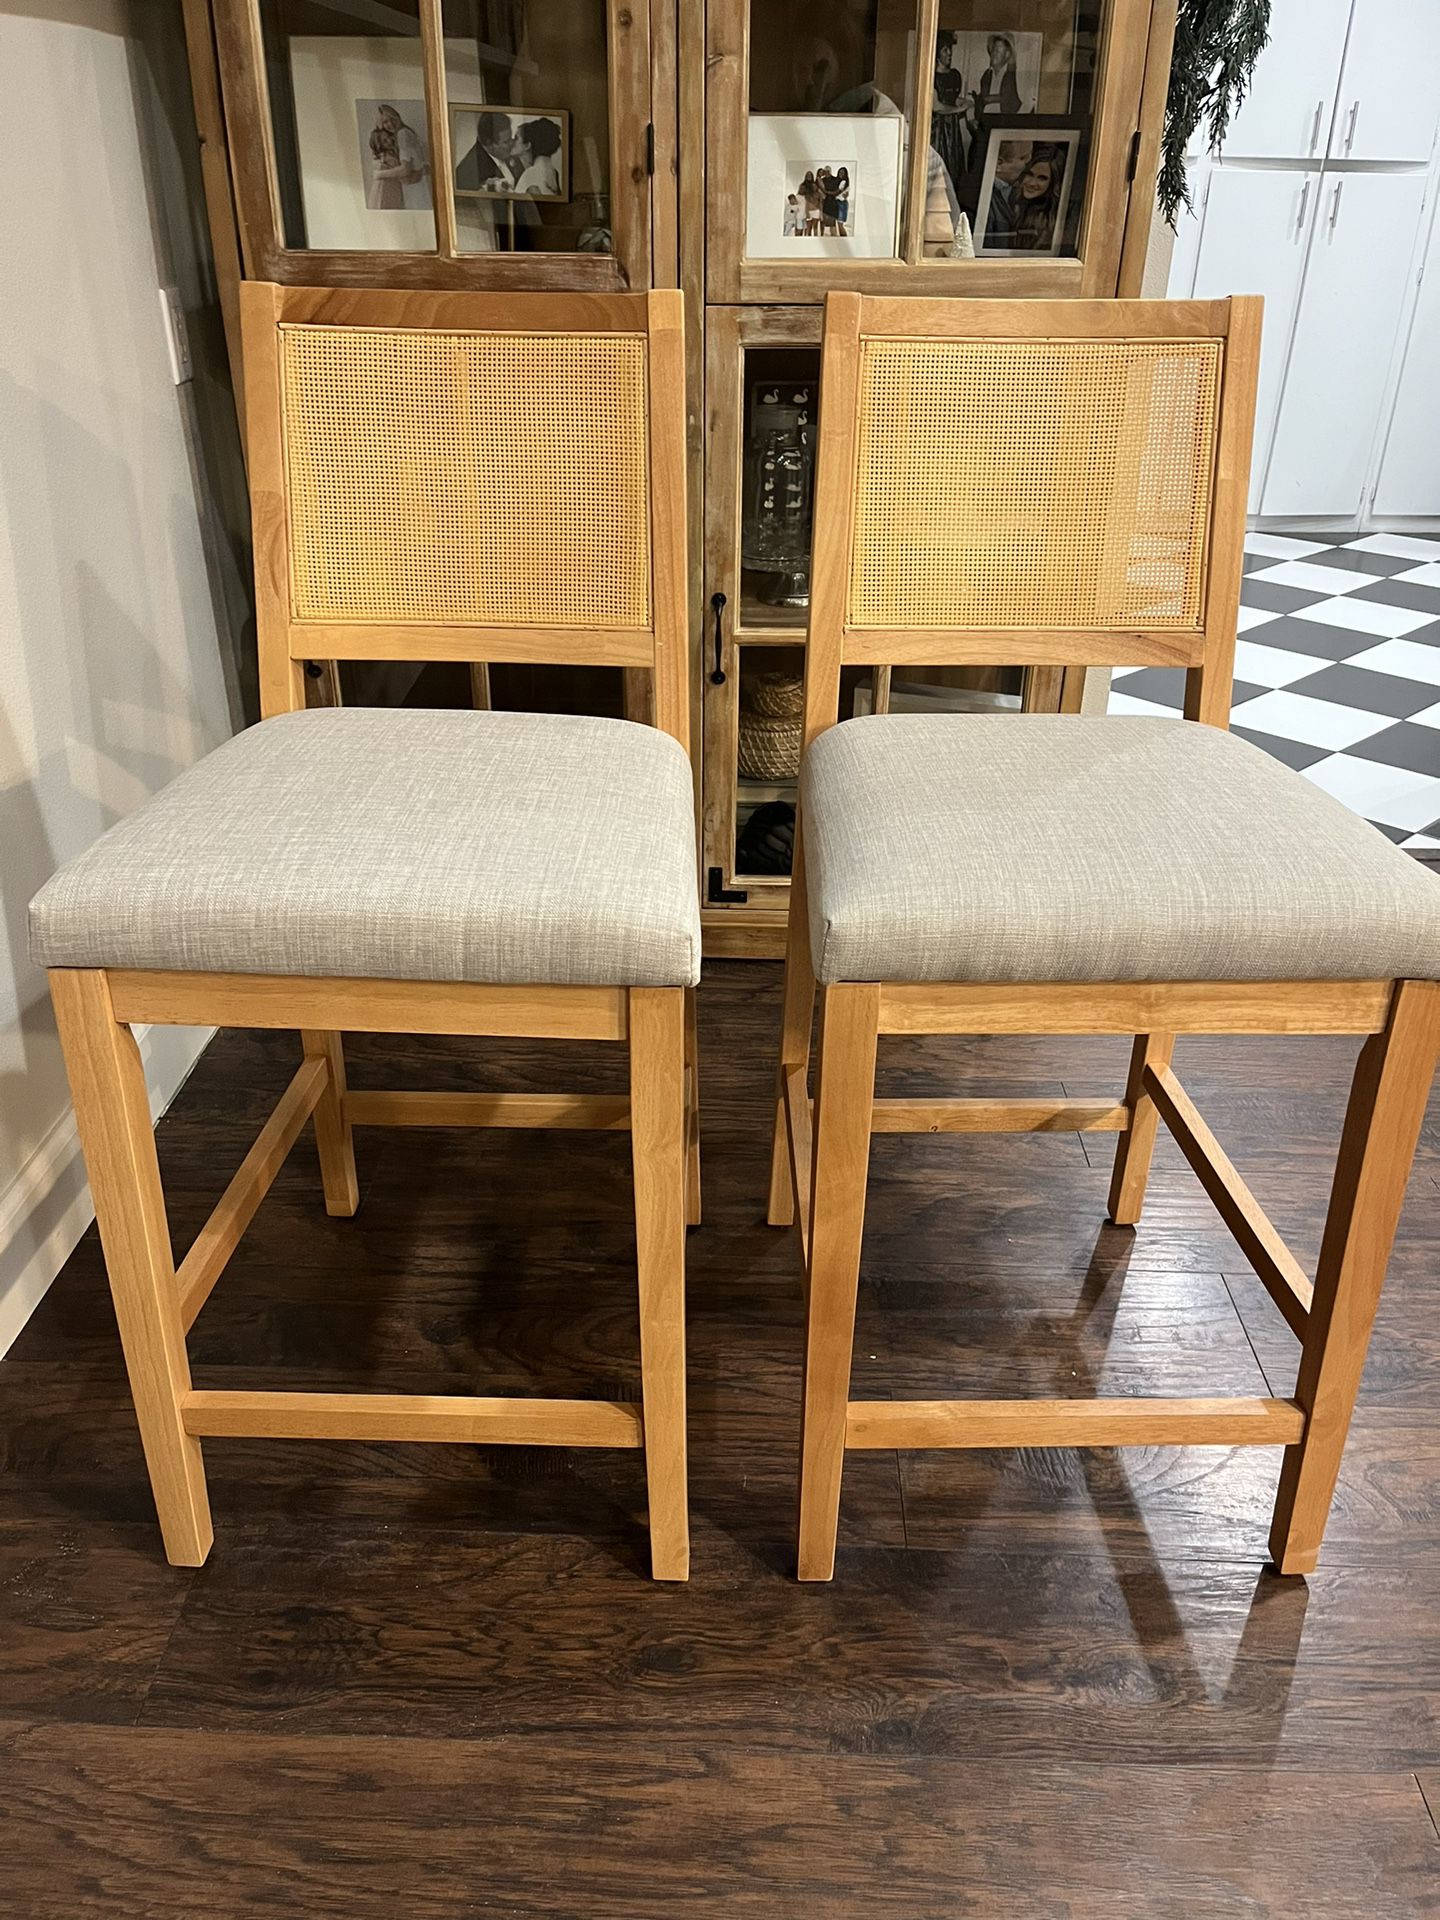 Countertop Stools Cane Back And Gray Upholstery Seat